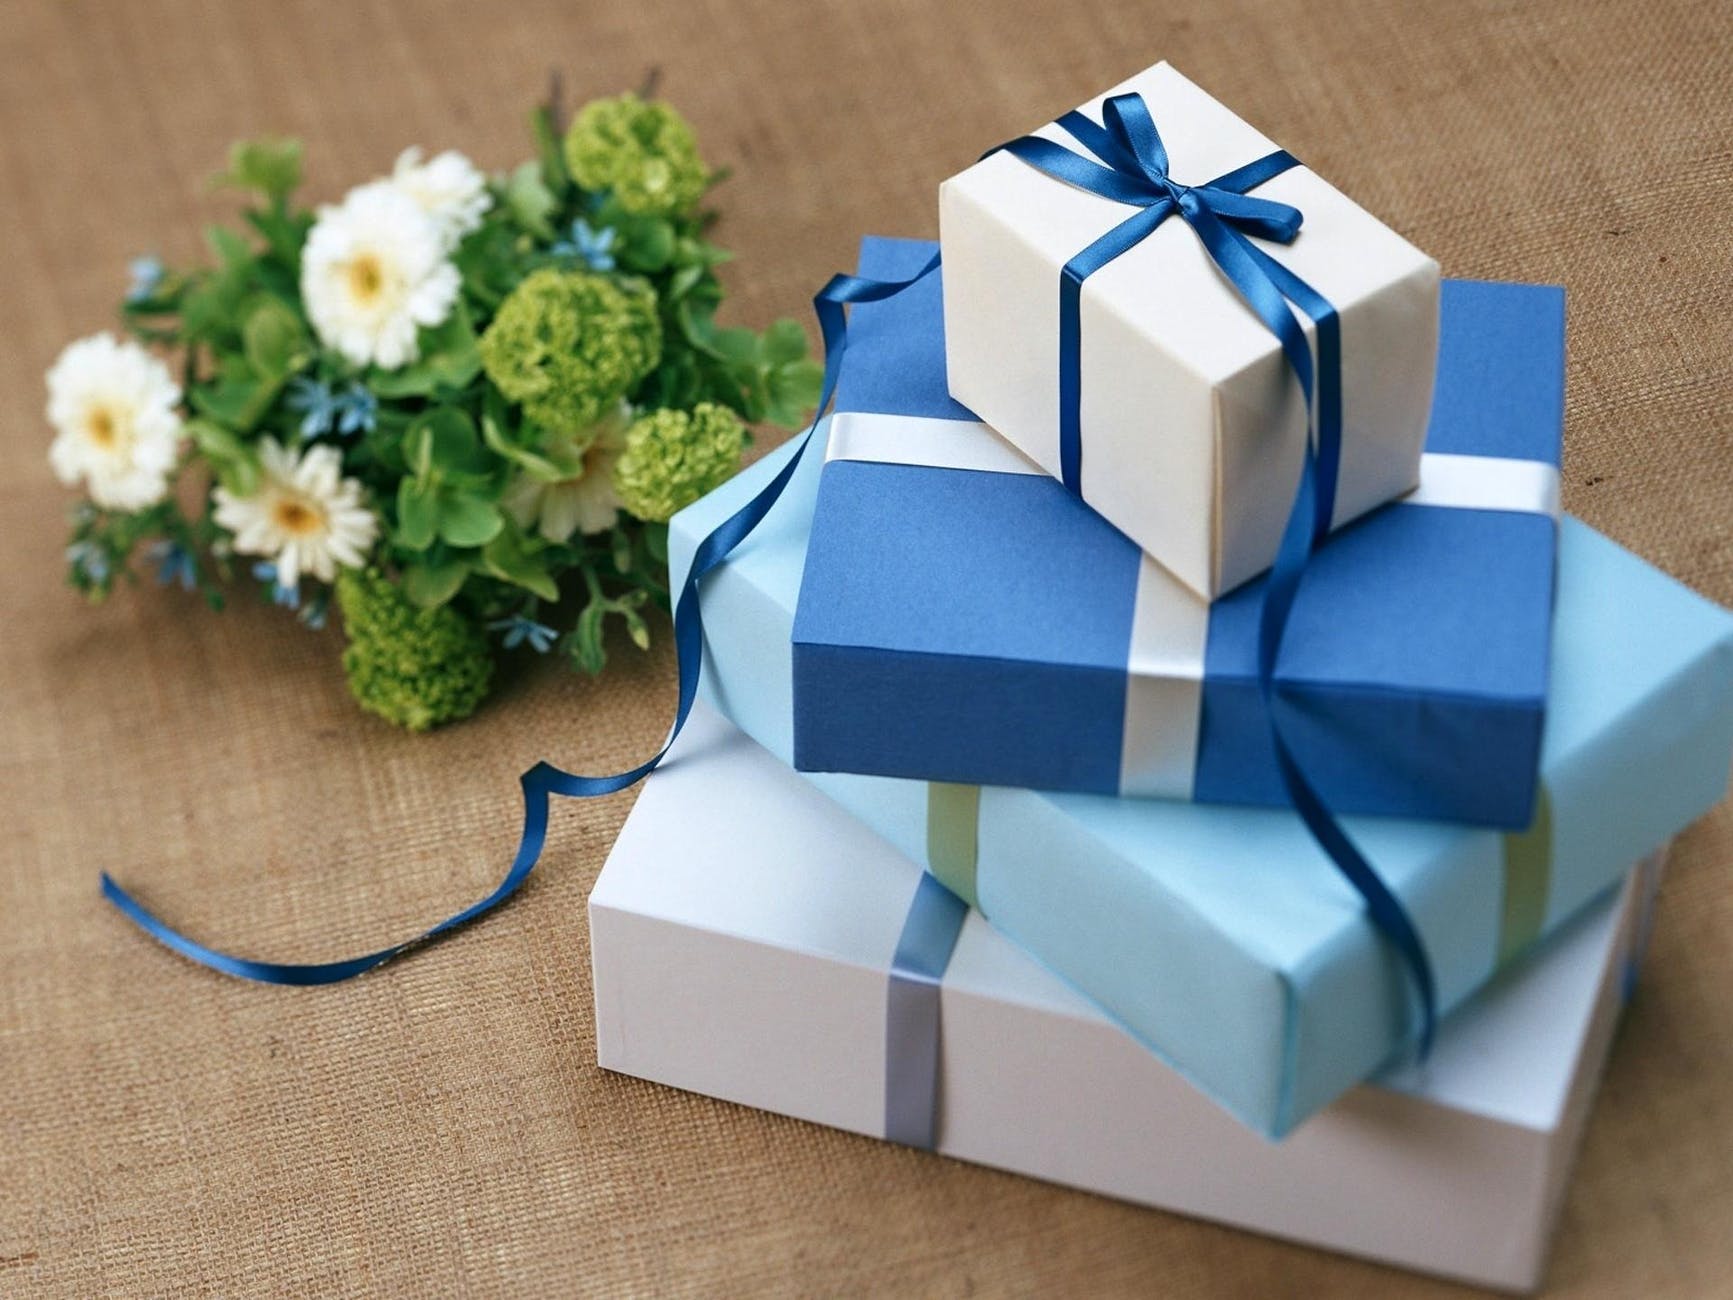 Diwali Gift Hamper Idea for Corporate – Between Boxes Gifts